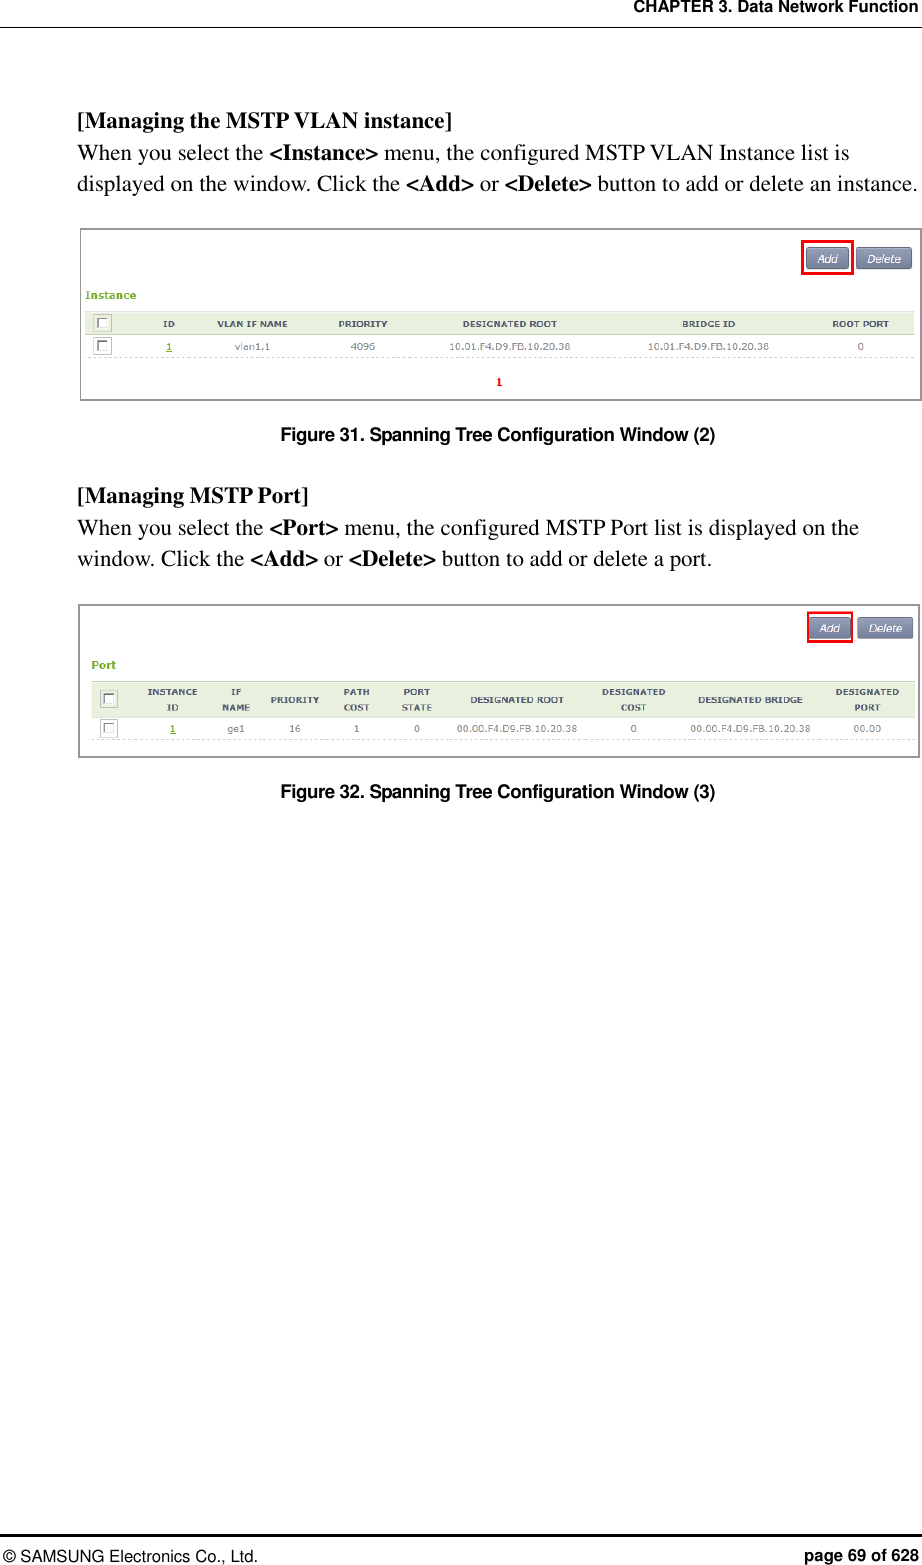 CHAPTER 3. Data Network Function ©  SAMSUNG Electronics Co., Ltd.  page 69 of 628 [Managing the MSTP VLAN instance] When you select the &lt;Instance&gt; menu, the configured MSTP VLAN Instance list is displayed on the window. Click the &lt;Add&gt; or &lt;Delete&gt; button to add or delete an instance.  Figure 31. Spanning Tree Configuration Window (2)  [Managing MSTP Port] When you select the &lt;Port&gt; menu, the configured MSTP Port list is displayed on the window. Click the &lt;Add&gt; or &lt;Delete&gt; button to add or delete a port.  Figure 32. Spanning Tree Configuration Window (3)  